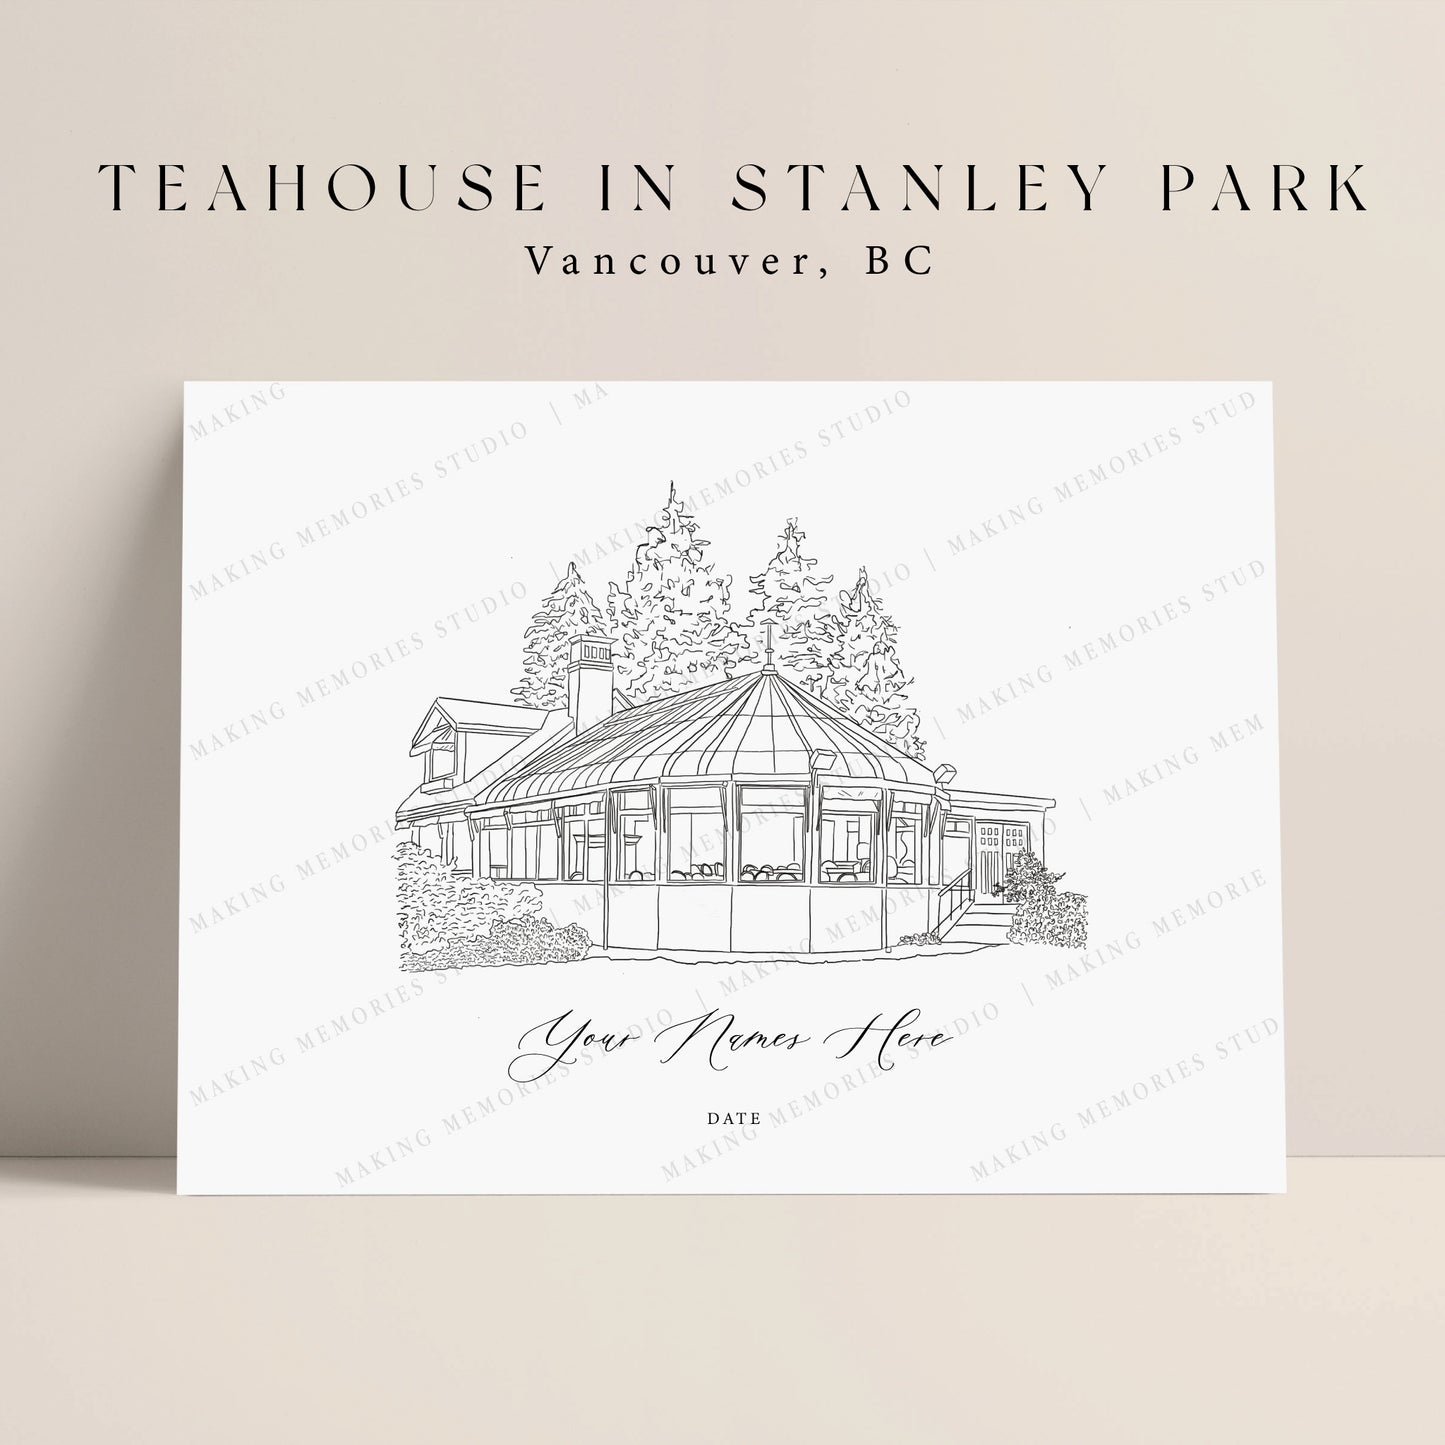 The Teahouse at Stanley Park